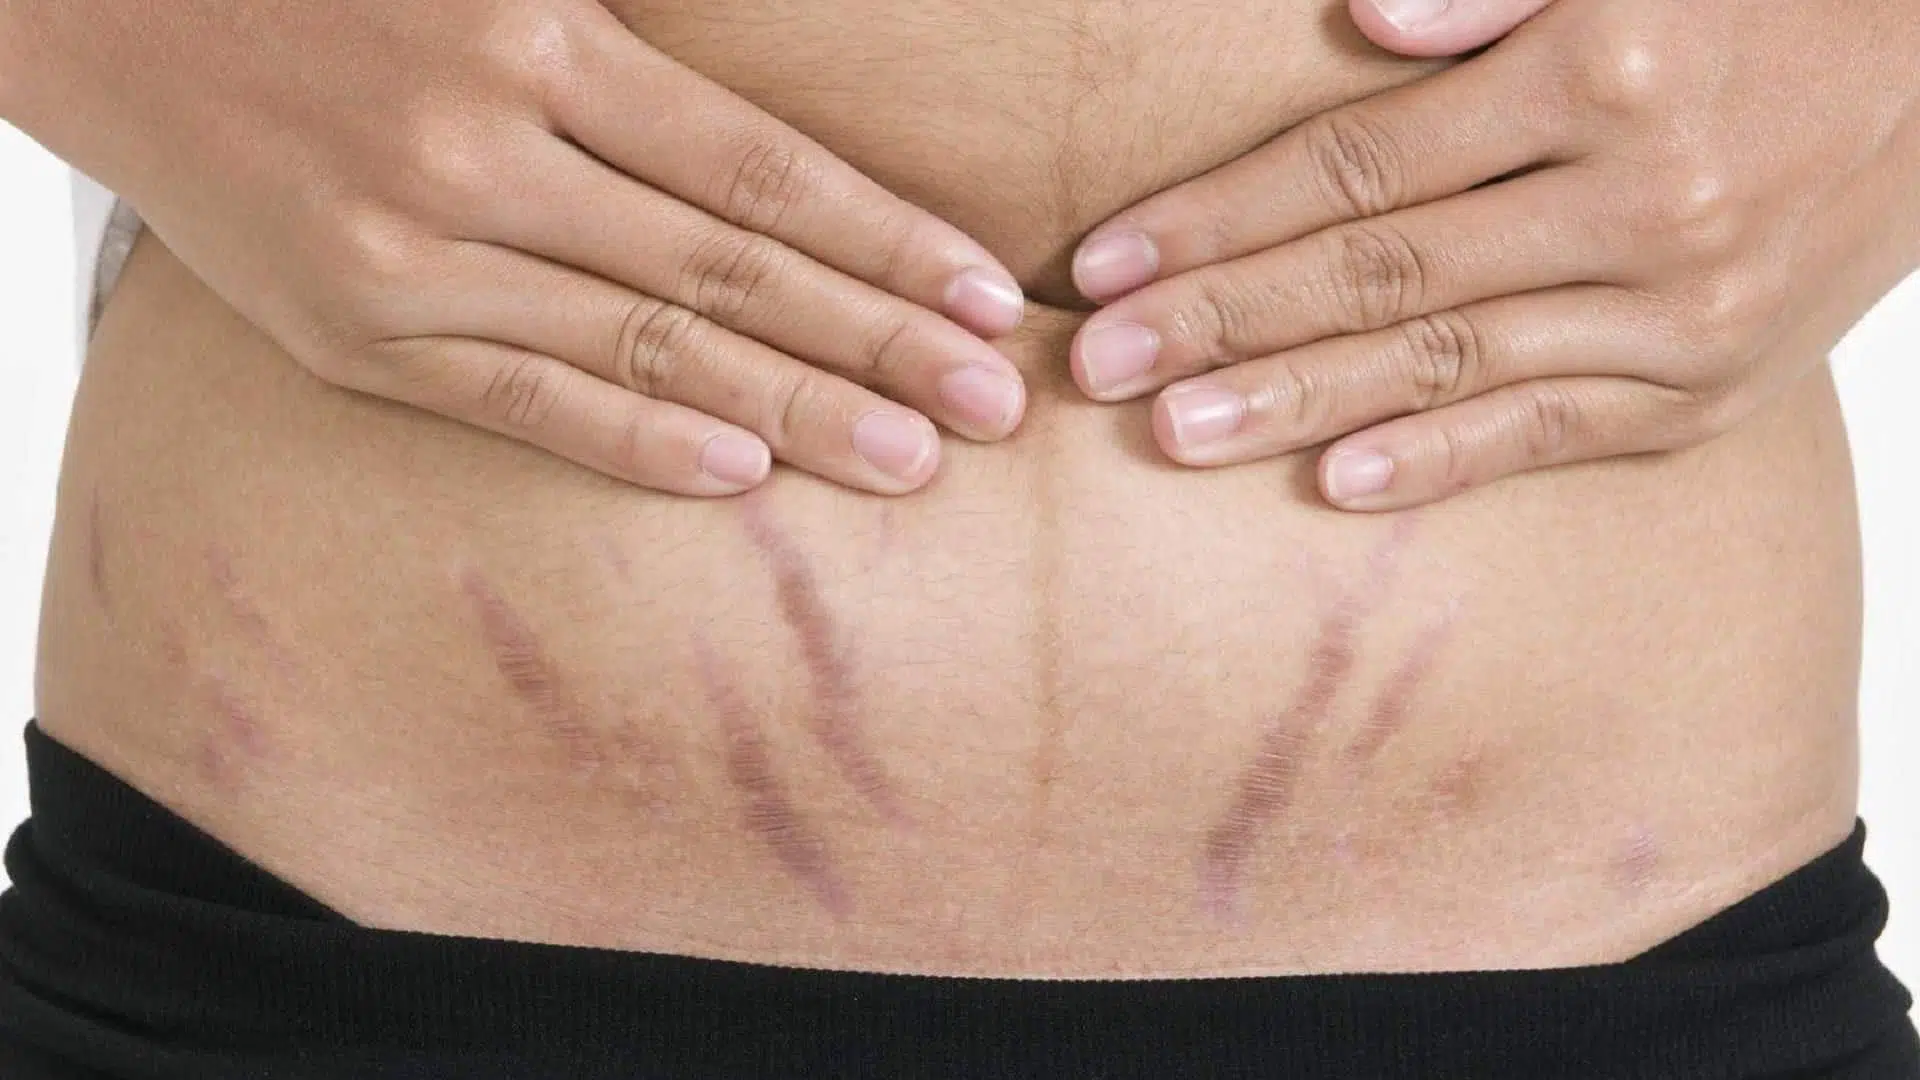 Purple Stretch Marks: Can You Get Rid of Them?